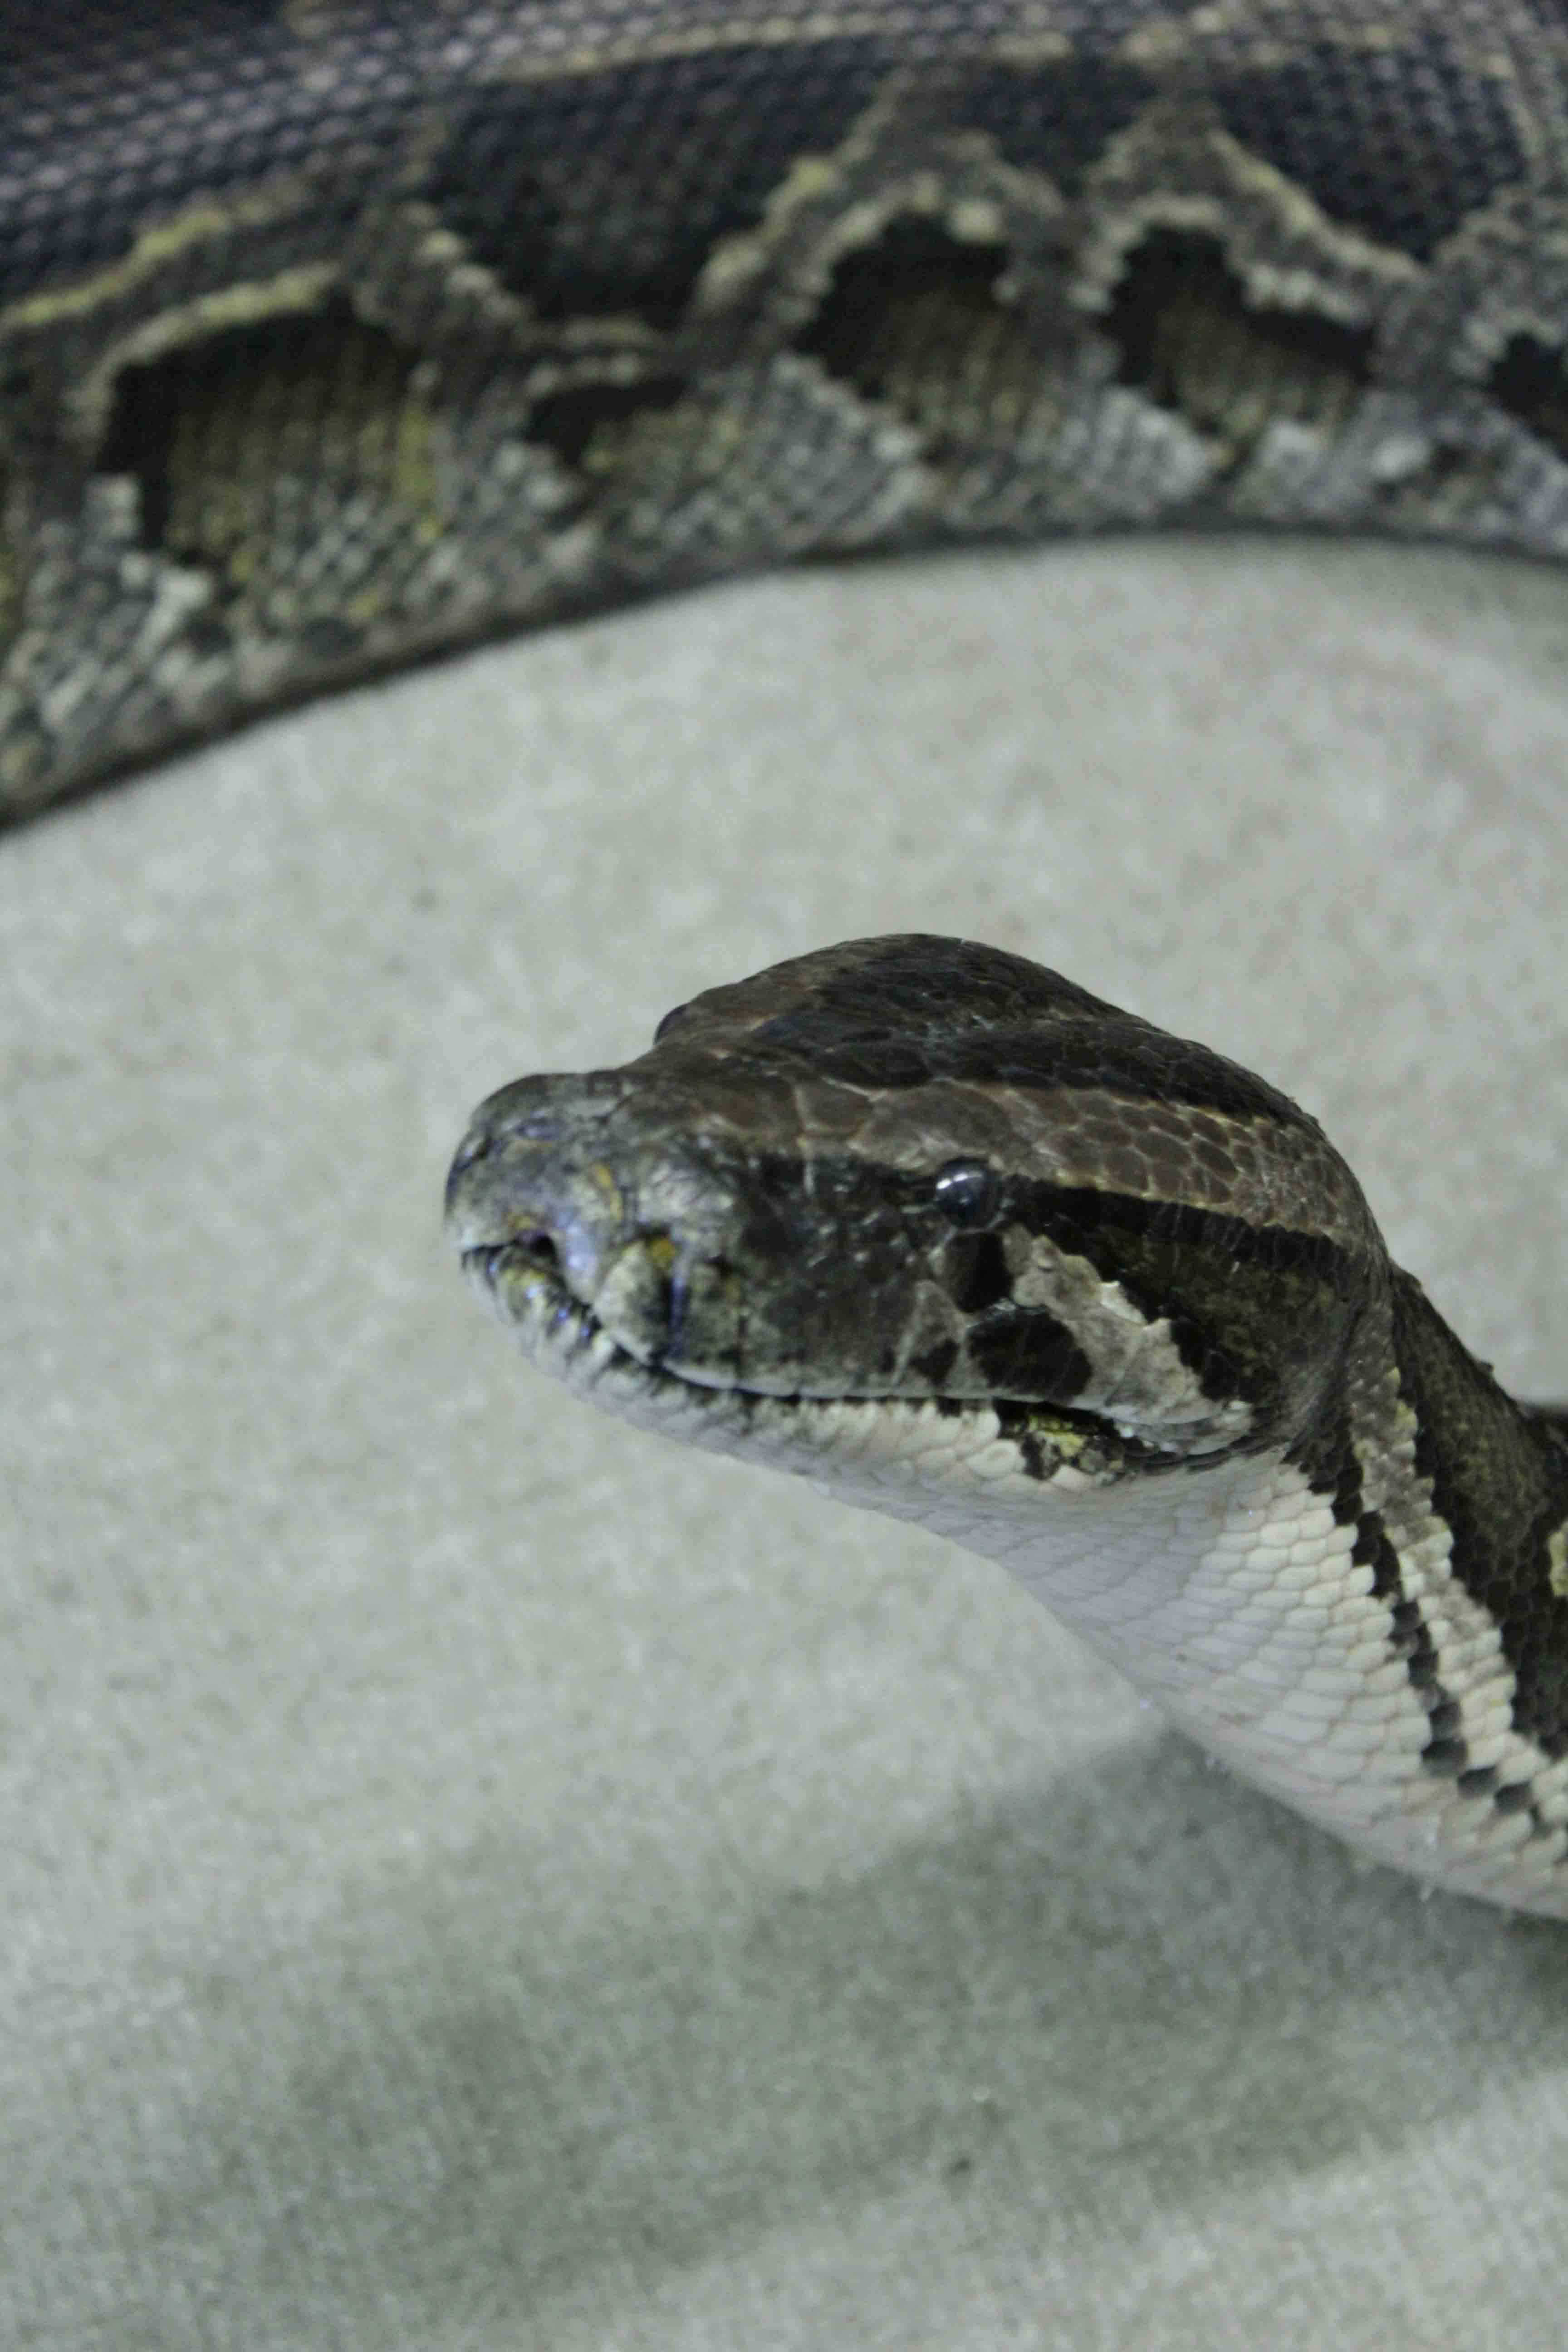 Repticon Shows the “Soft” Side of Snakes